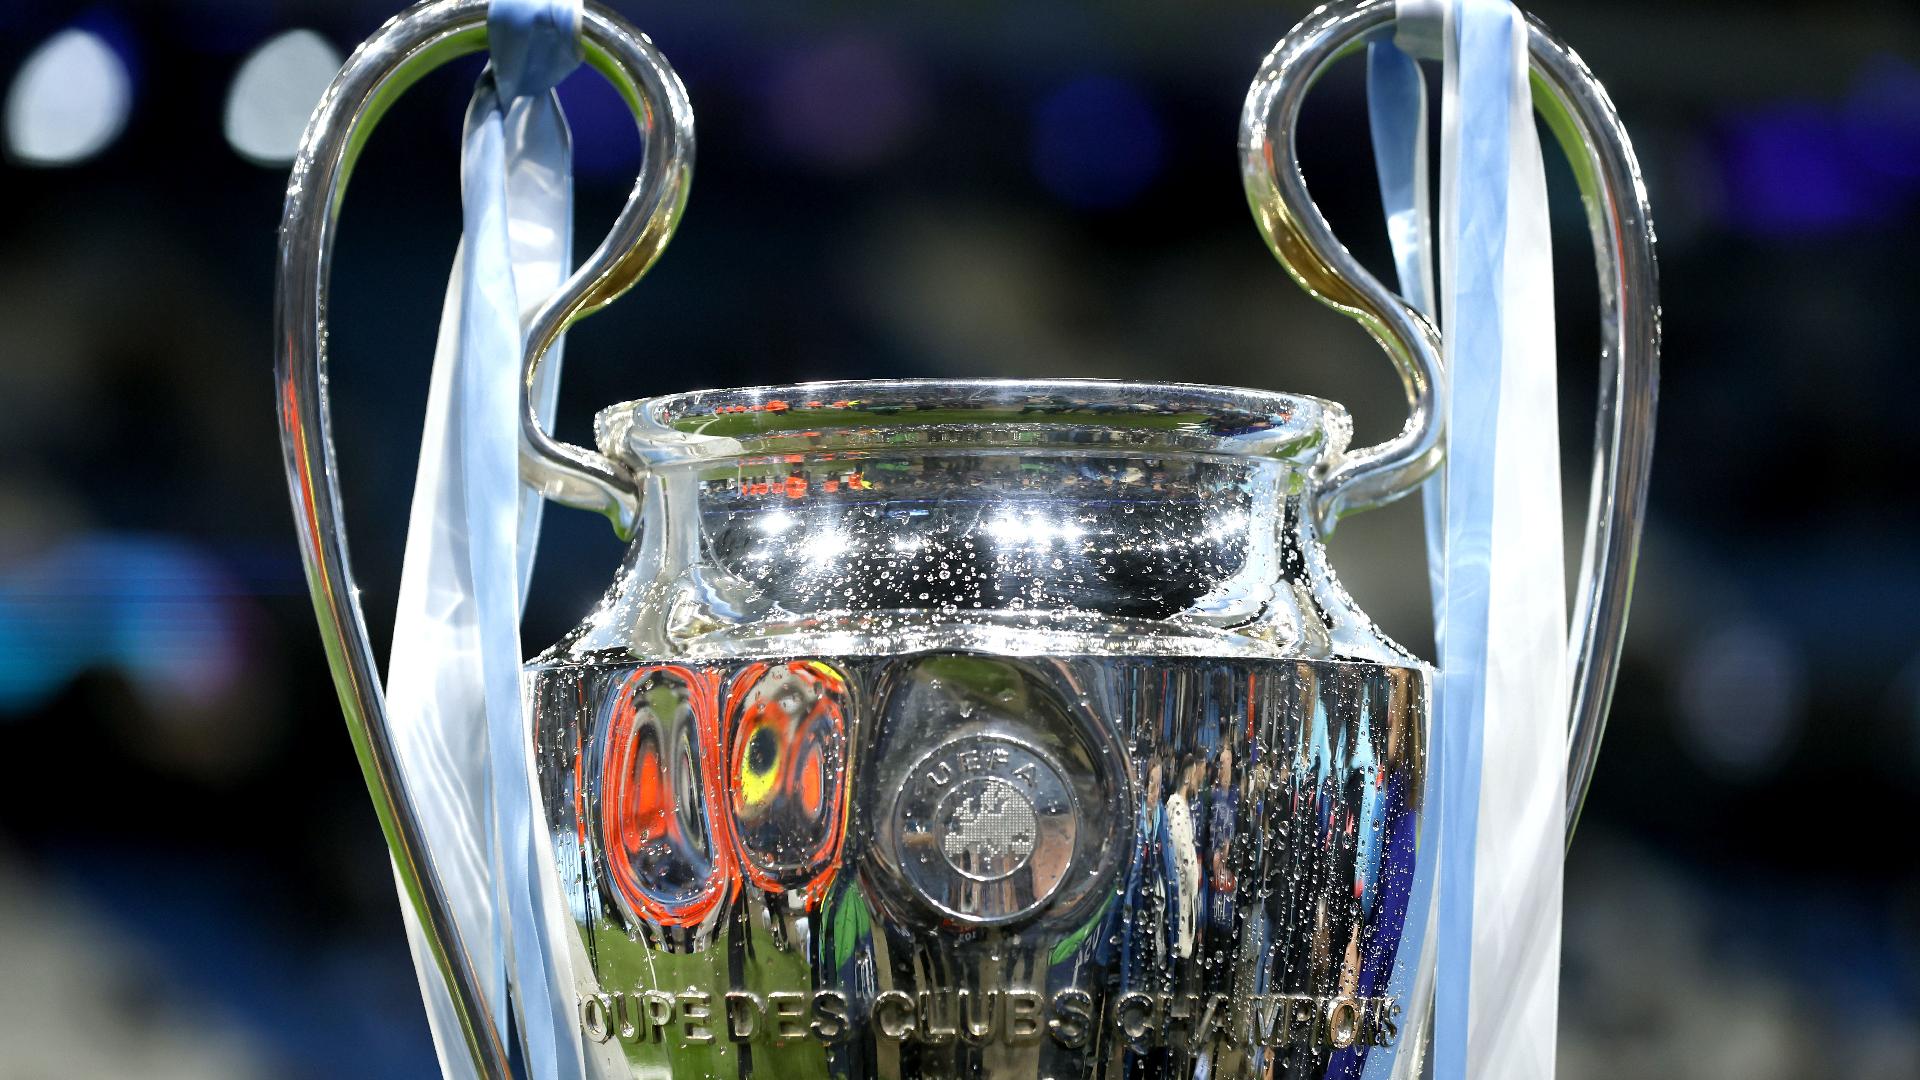 The challenges awaiting the five British teams in the Champions League this week